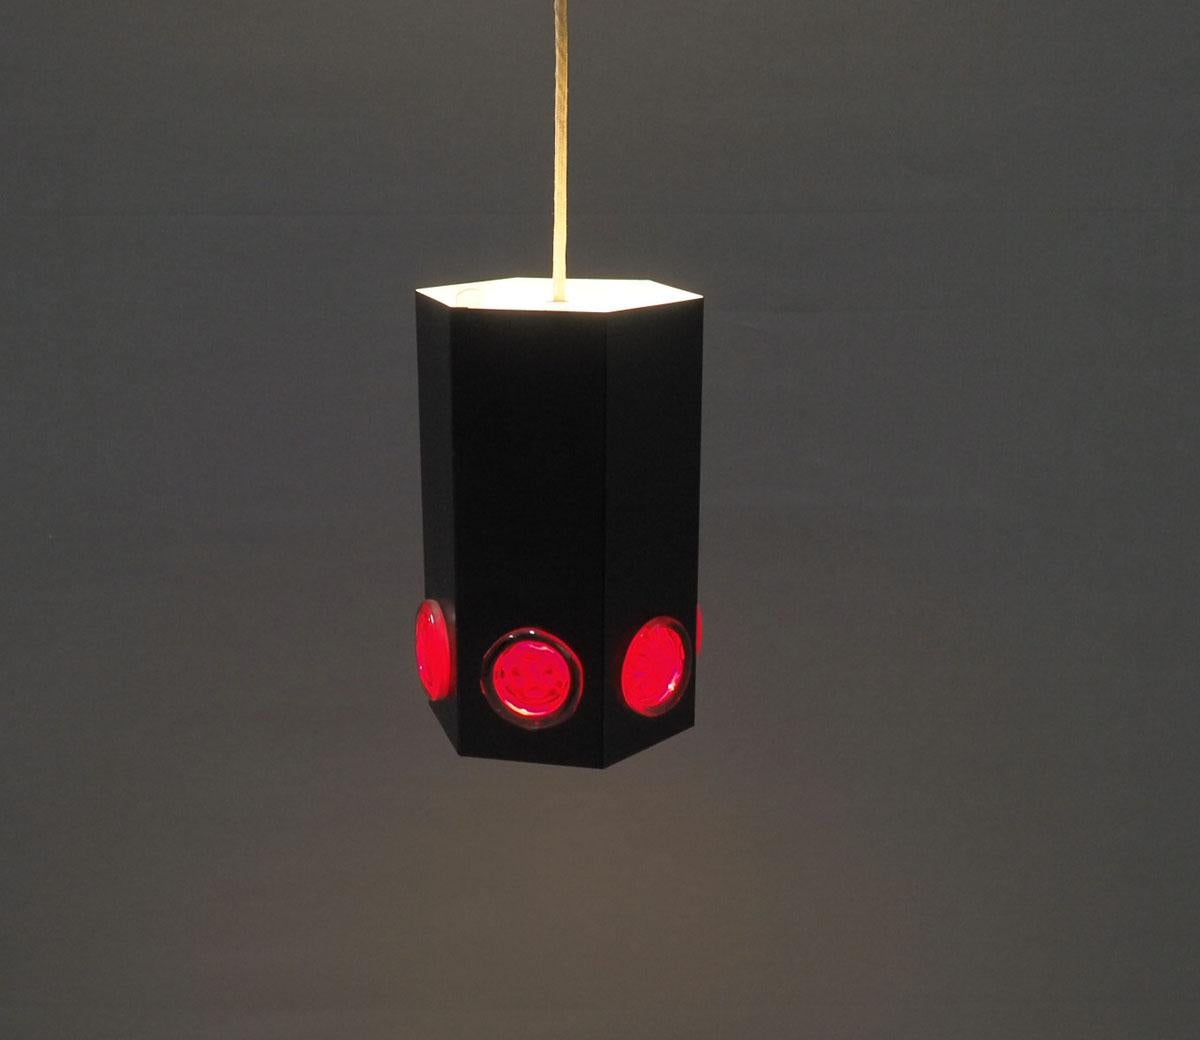  Rare cylinder-shaped lamp made of black powder-coated metal from the 1960s produced by Holm Sorensen

The lamp has 6 corners and a circle of red glass on each surface at the bottom.

The inside is white, the lamp gives a wonderfully beautiful light